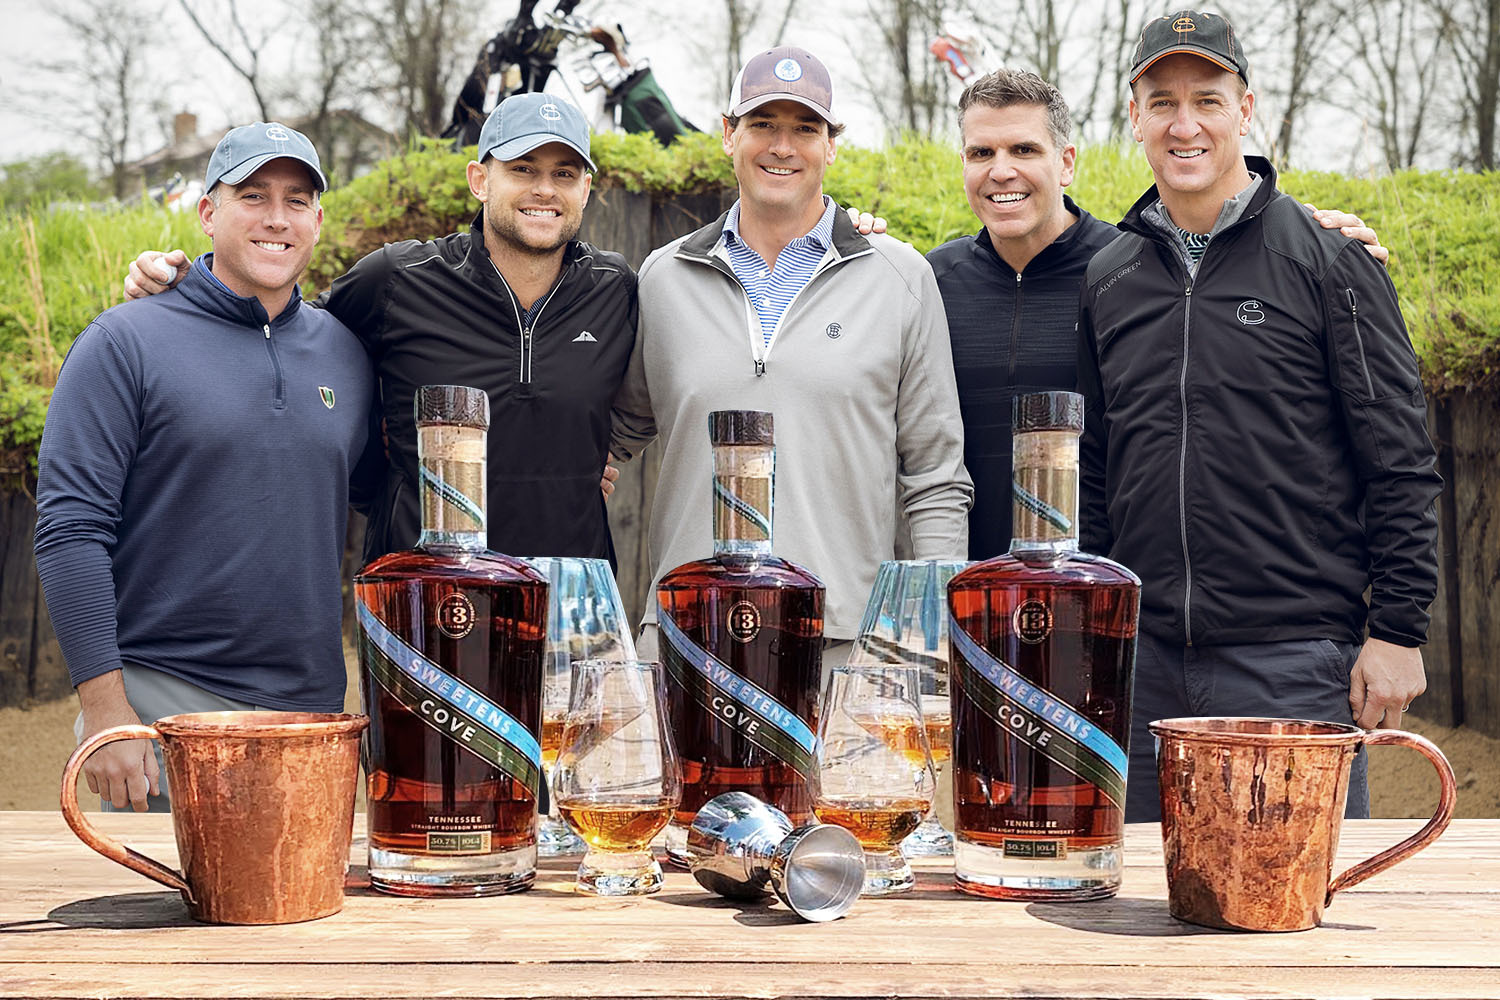 Peyton Manning and His Famous Friends Released a Bourbon - InsideHook